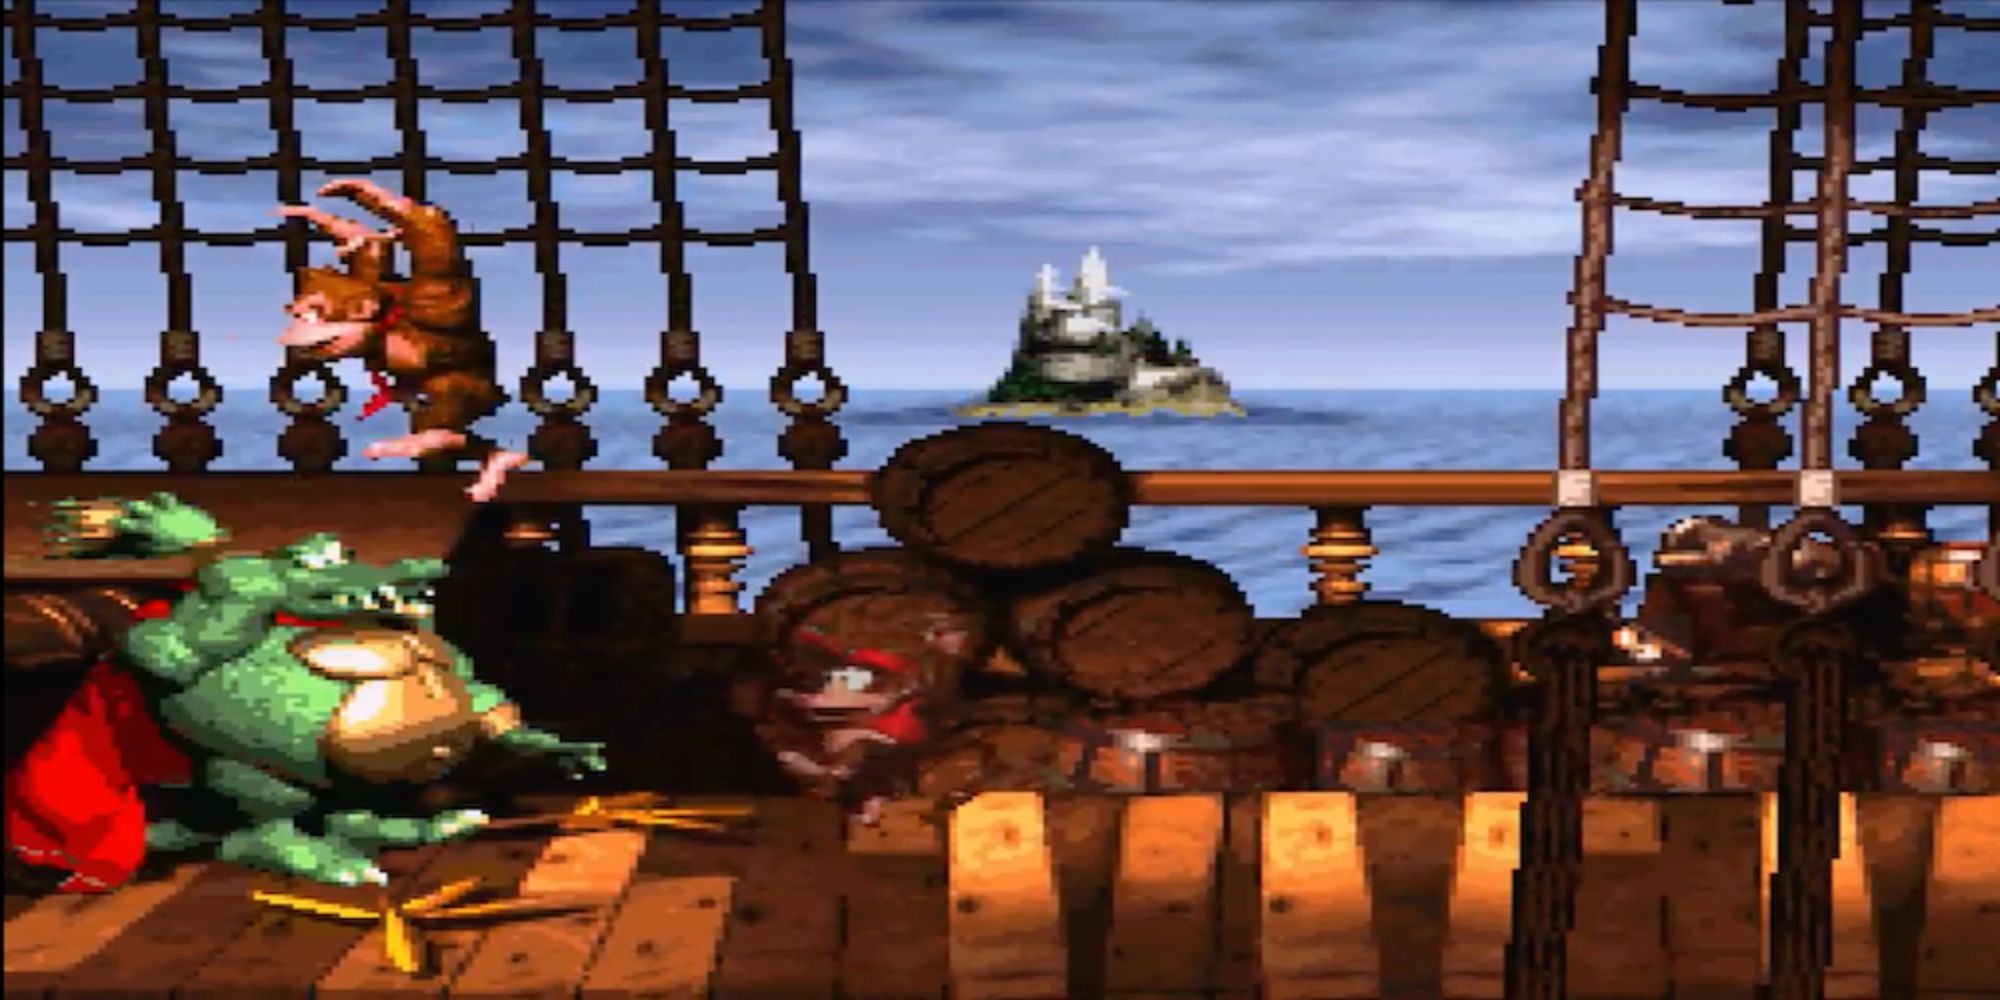 Donkey Kong Country Gangplank Galleon shows Donkey and Diddy Kong fighting King K Rool on a ship